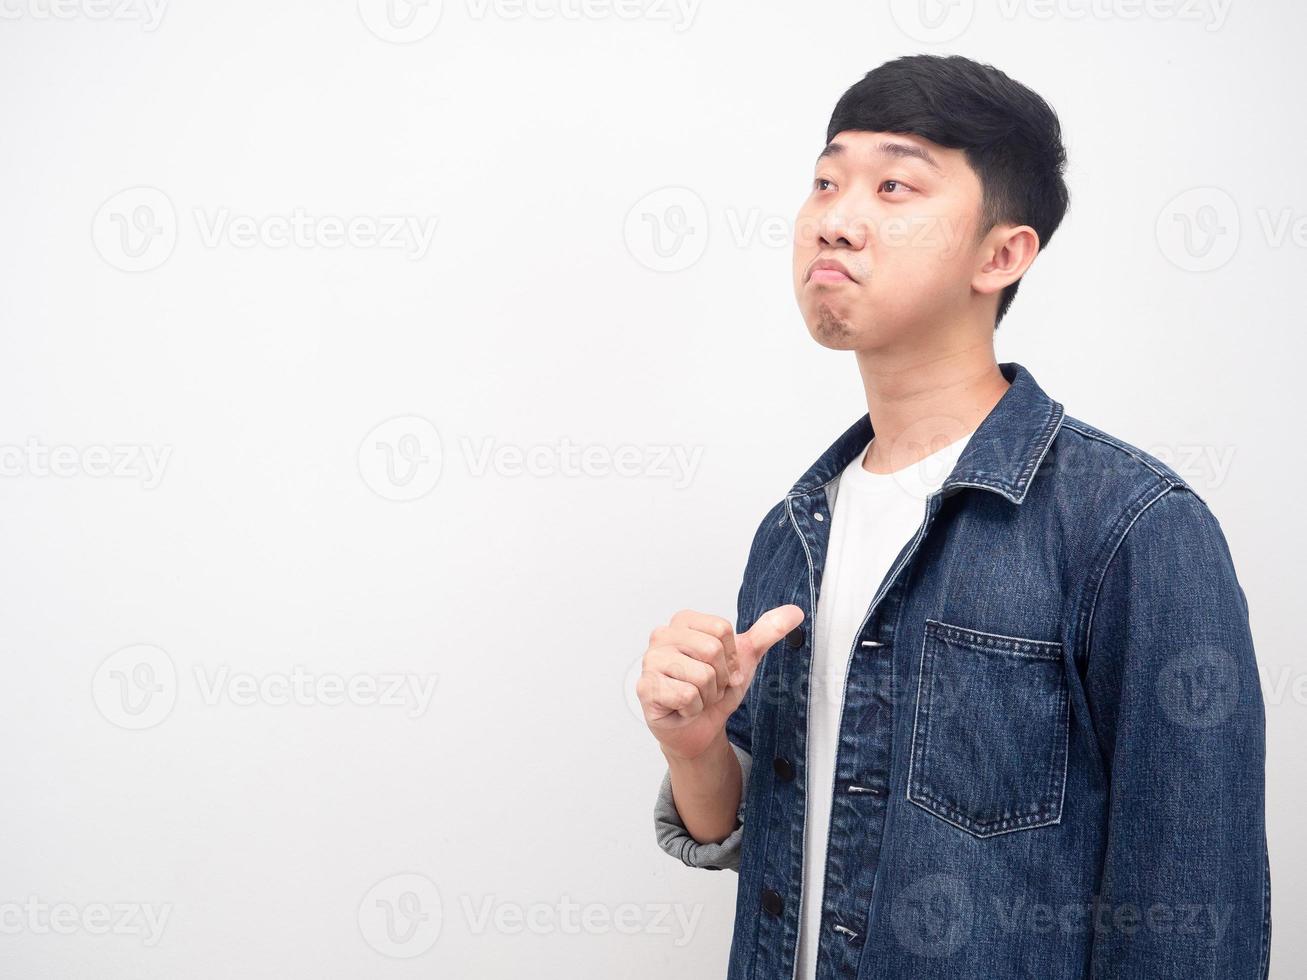 Asian man jean shirt point finger at himself arrogant face looking at copy space photo